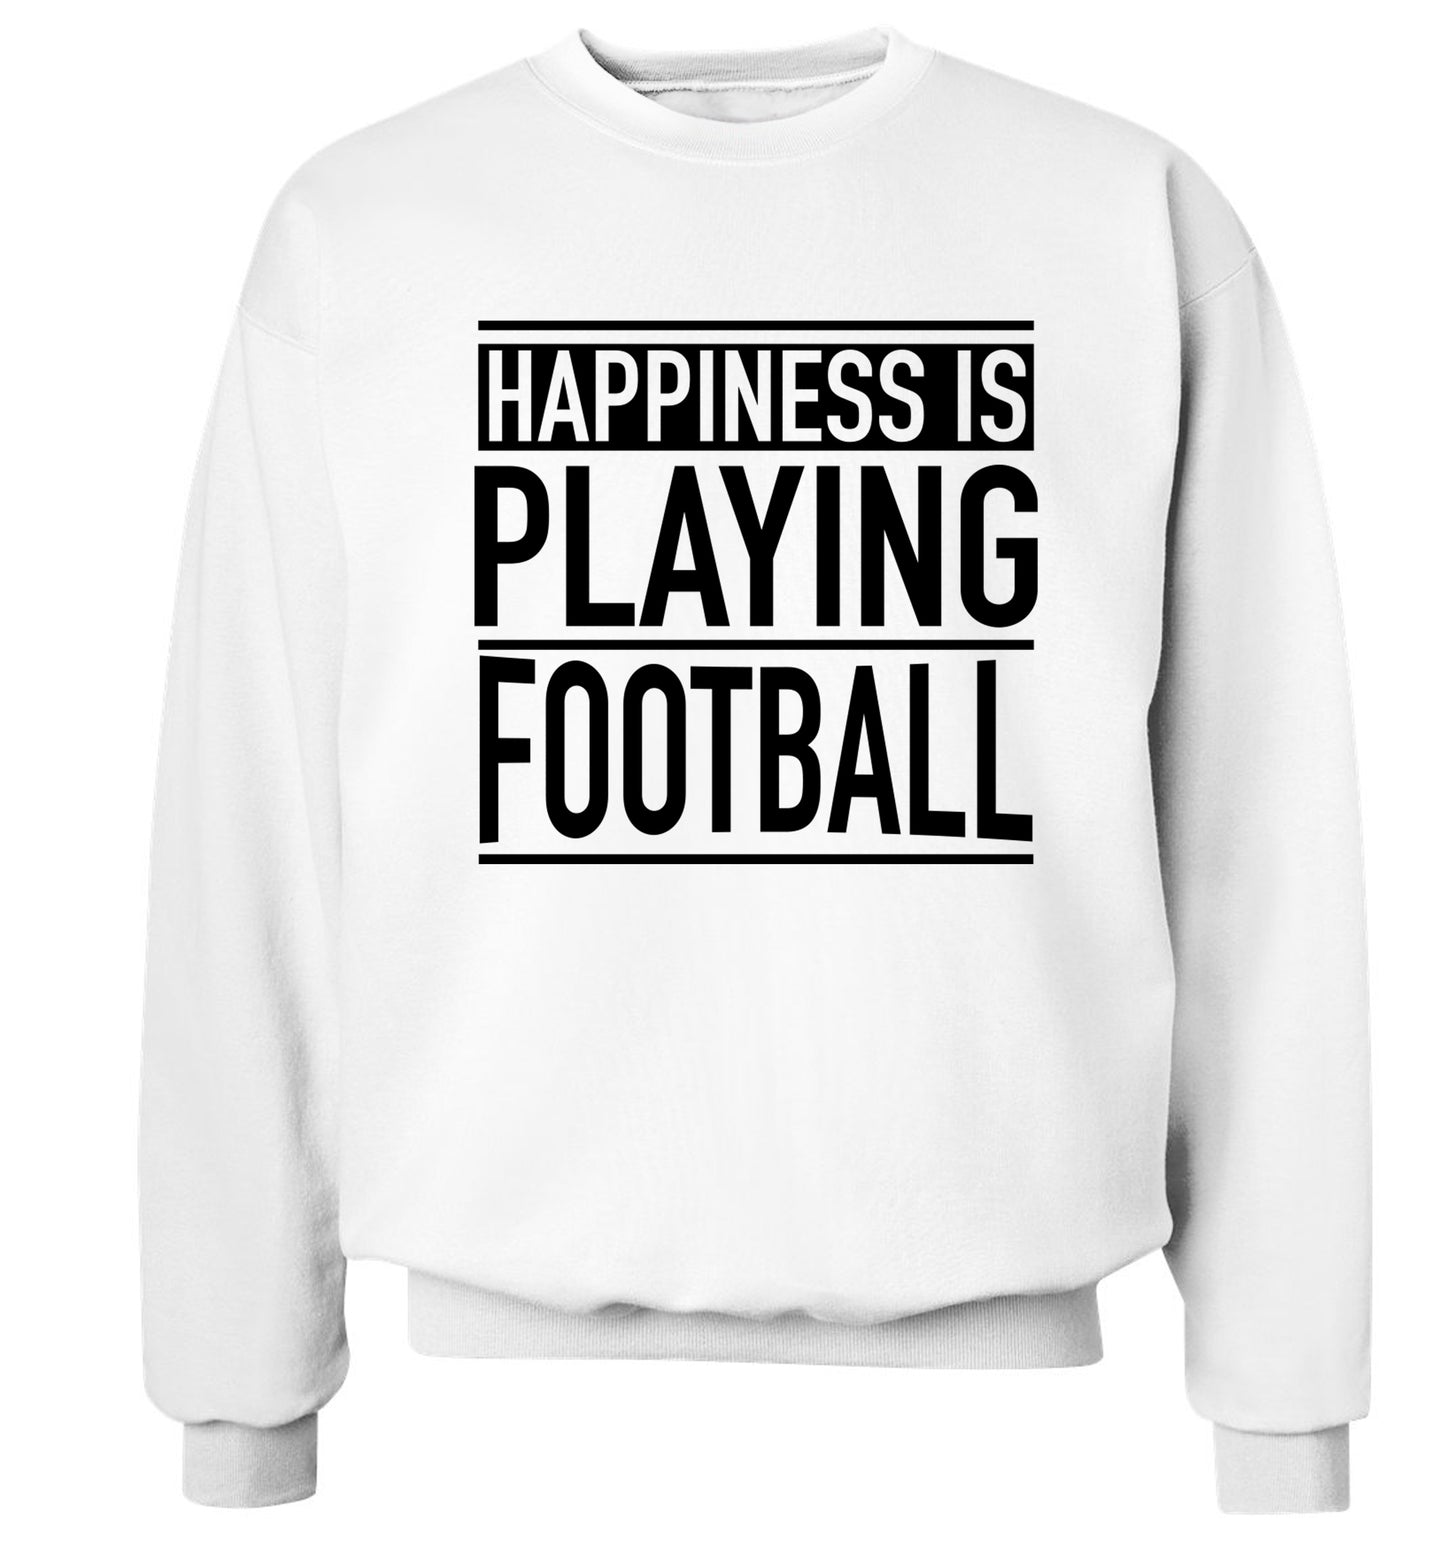 Happiness is playing football Adult's unisexwhite Sweater 2XL